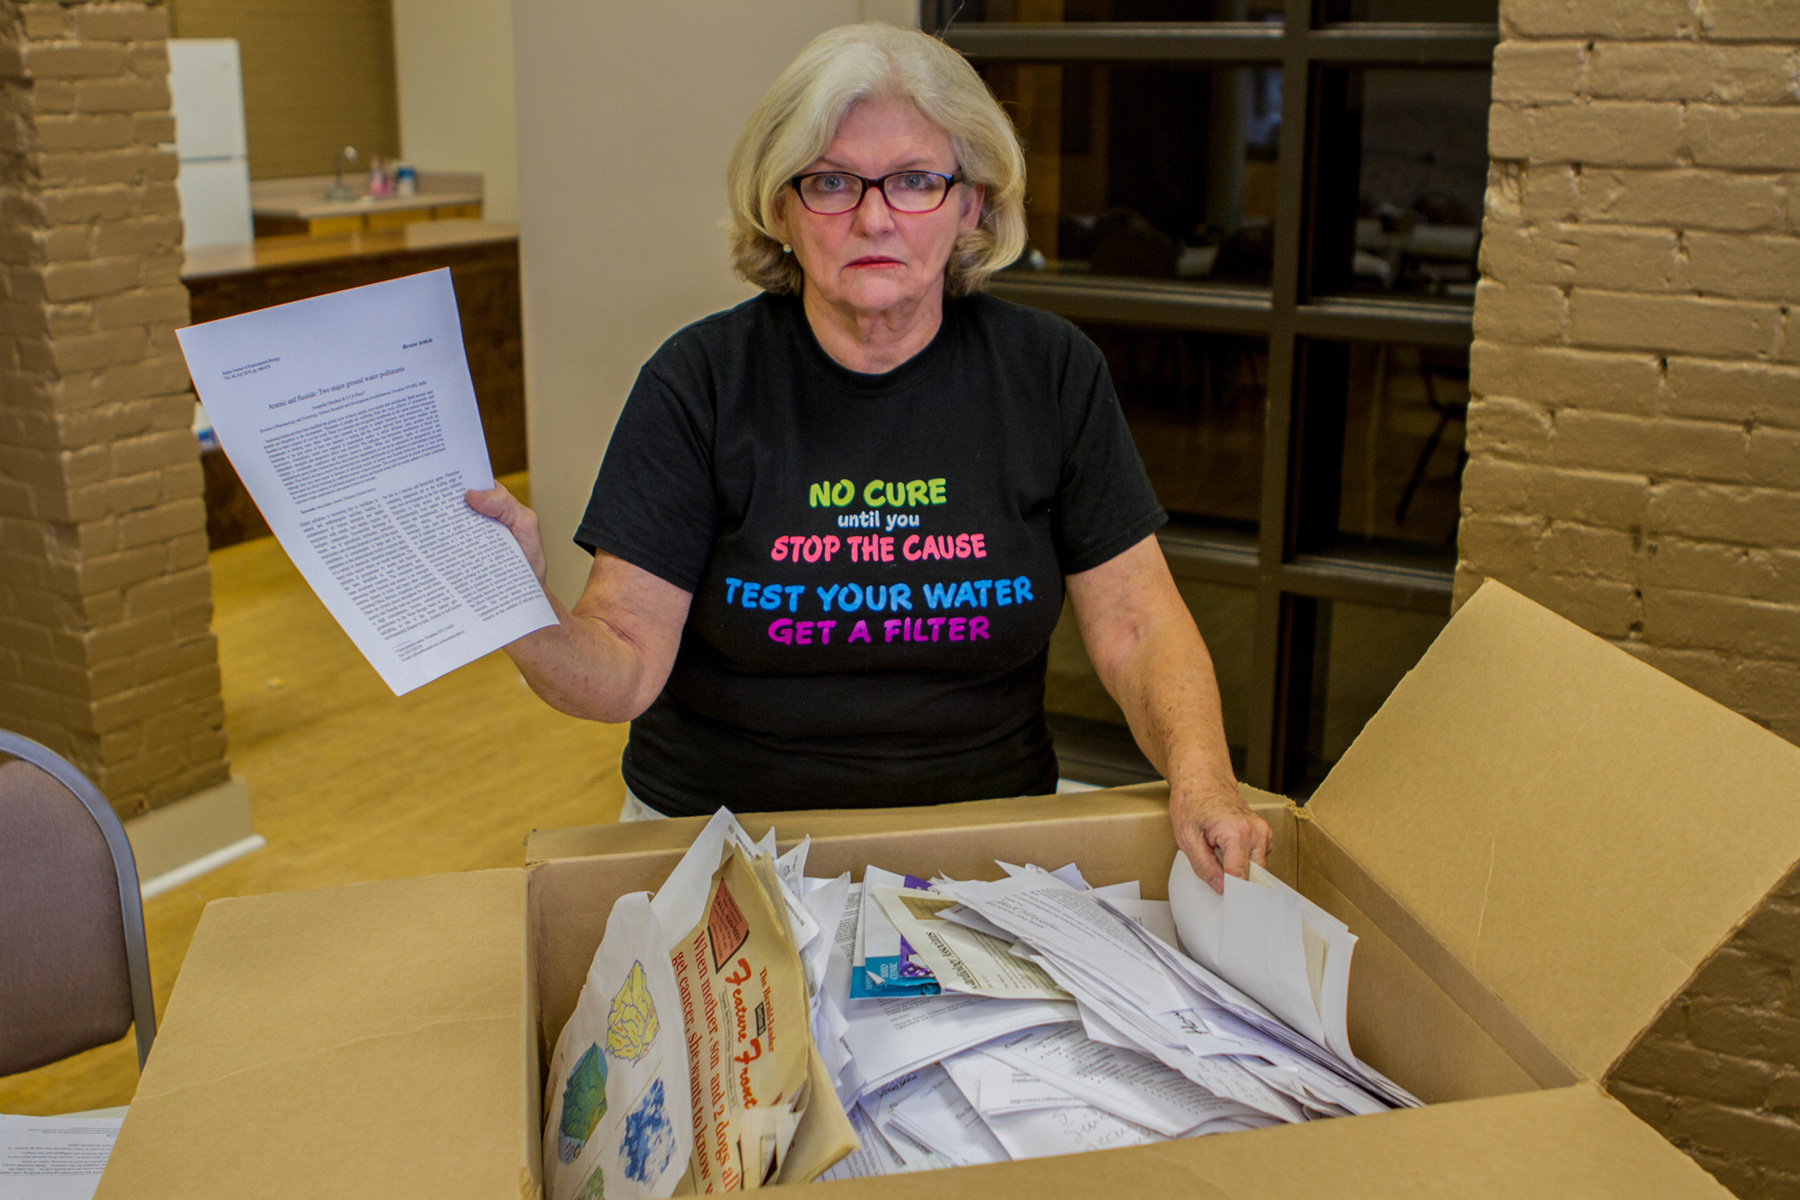 Georgia resident Janet McMahan sorts through documents she’s been collecting since her son died in 2014. She believes his death was caused by arsenic found in her family’s well water. (Brandon Kitchin/News21)